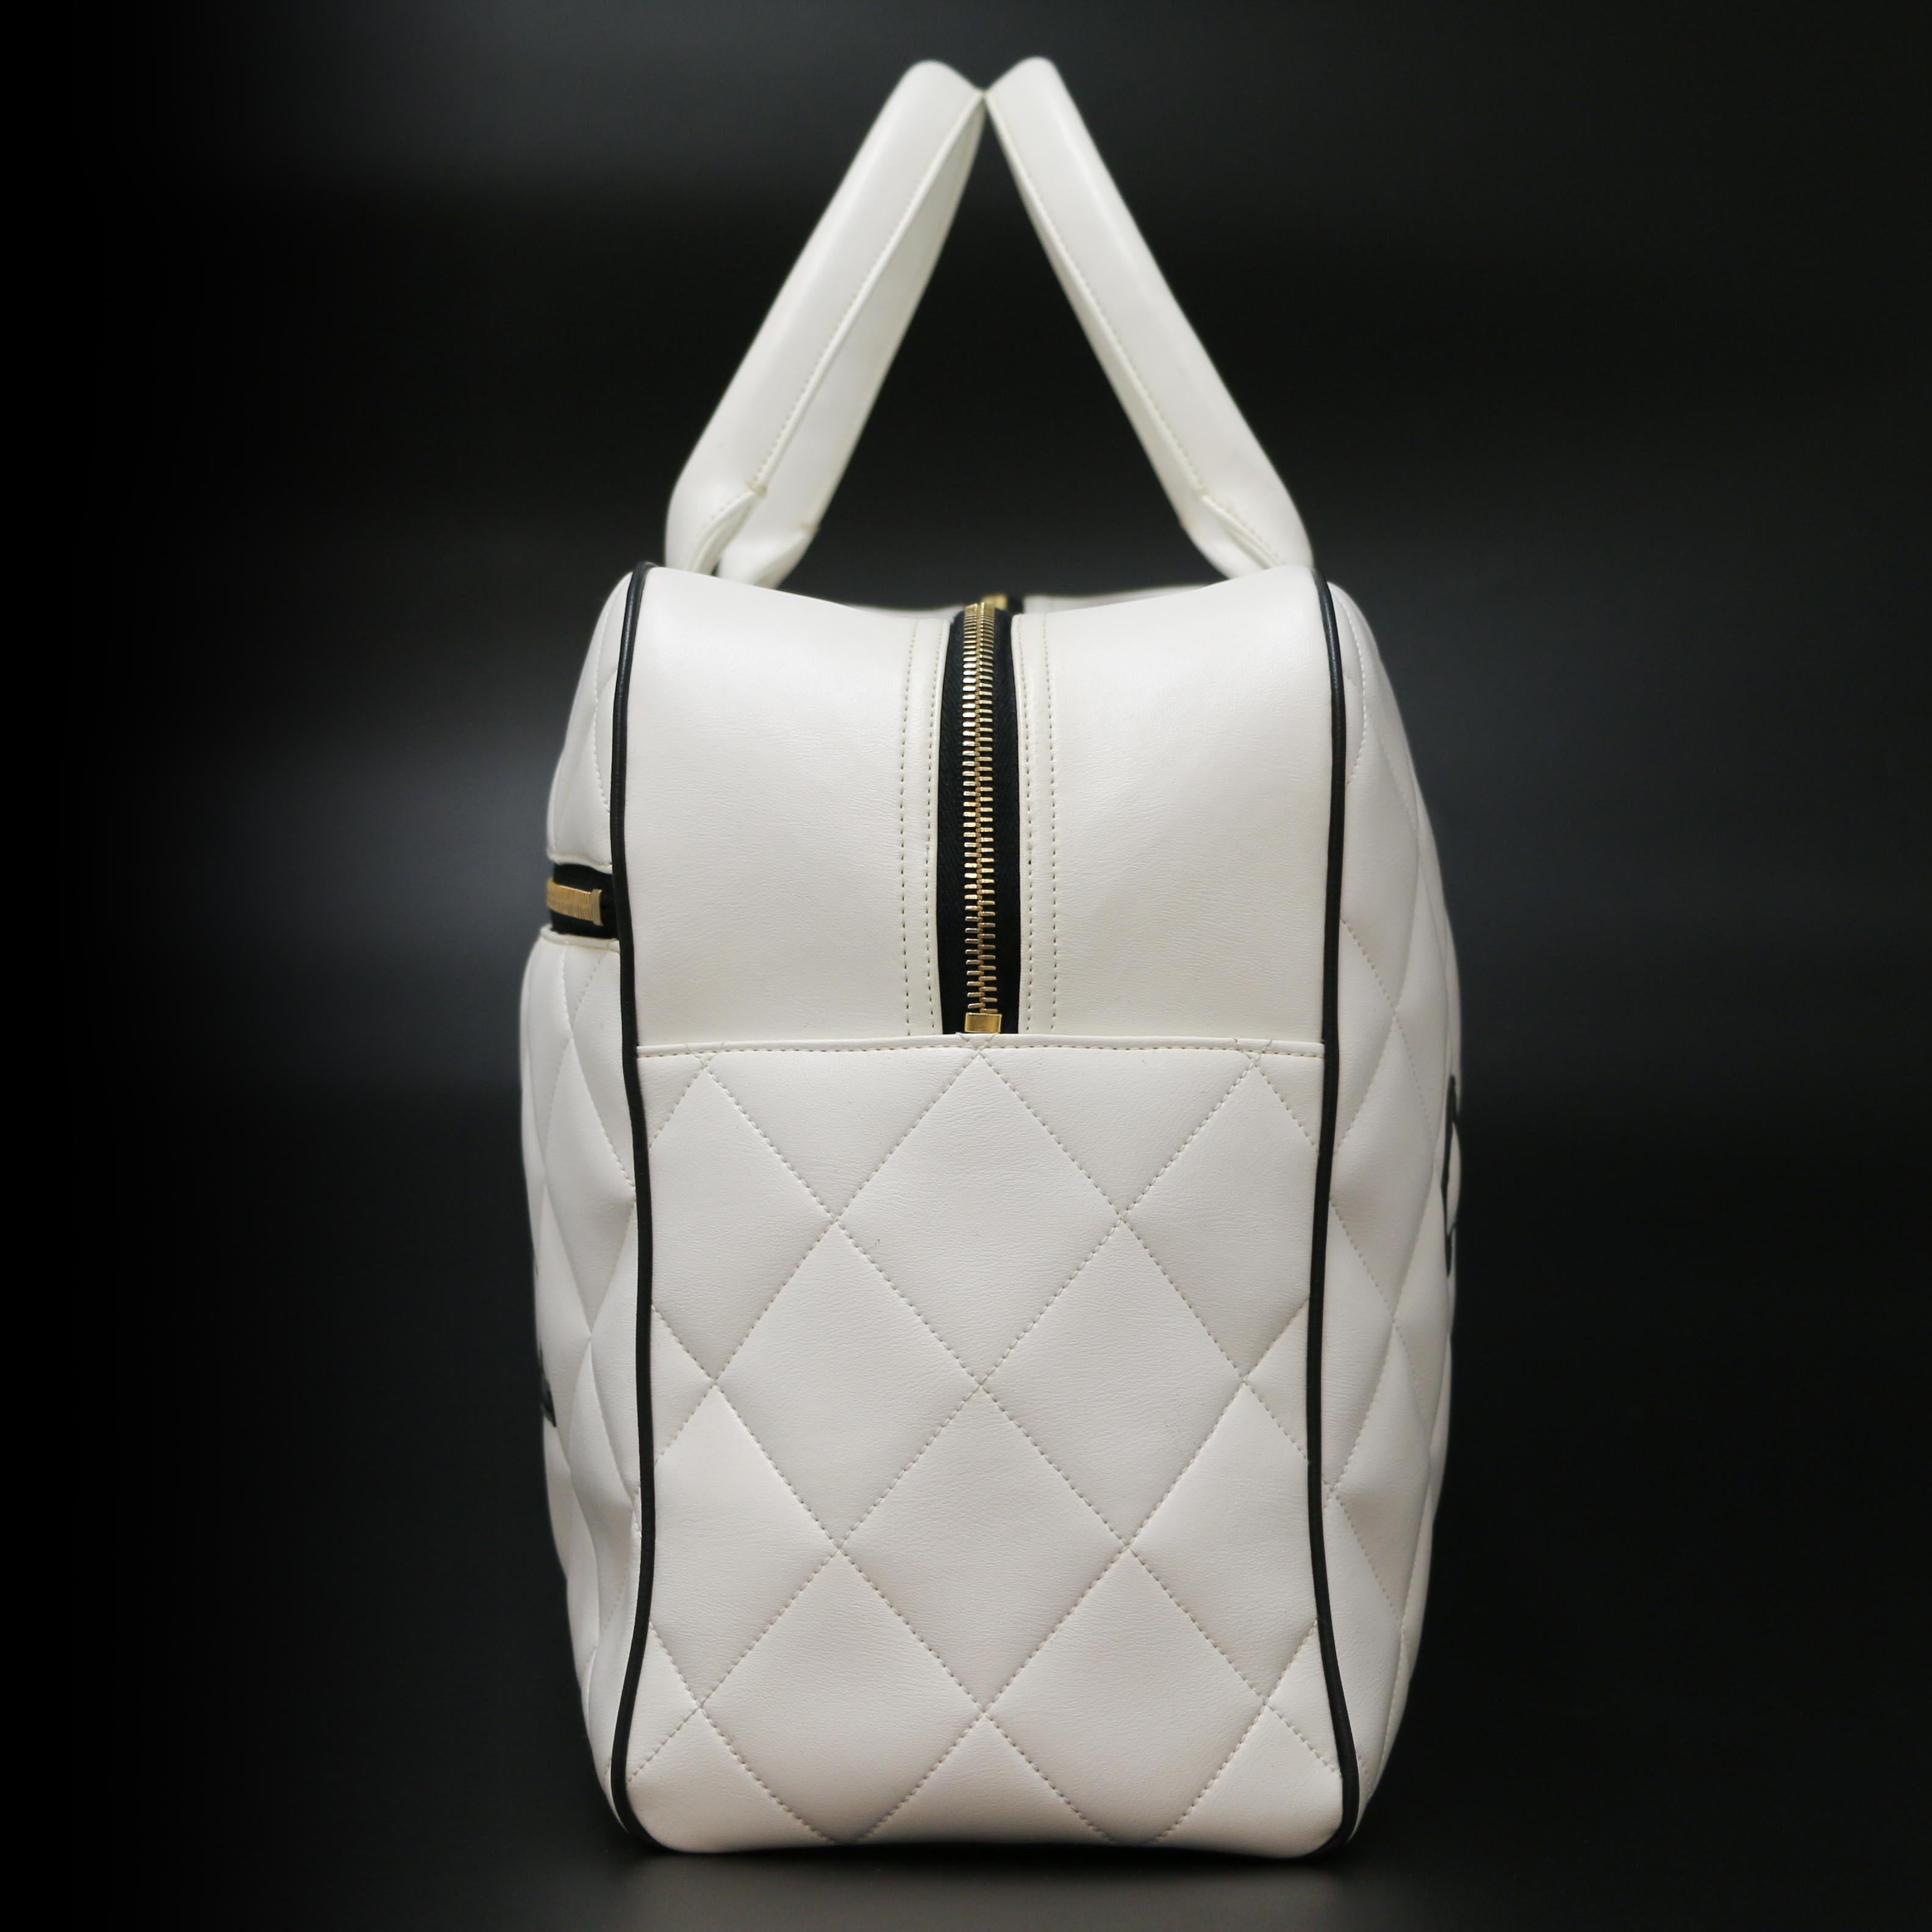 Vintage Chanel black and white bowling bag !

Condition : good because there are a few stains on the leather (see on pictures)
Made in France
Material : quilted lambskin leather
Color : white, black
Dimensions : 43 x 25 x 15 cm
Hologram :